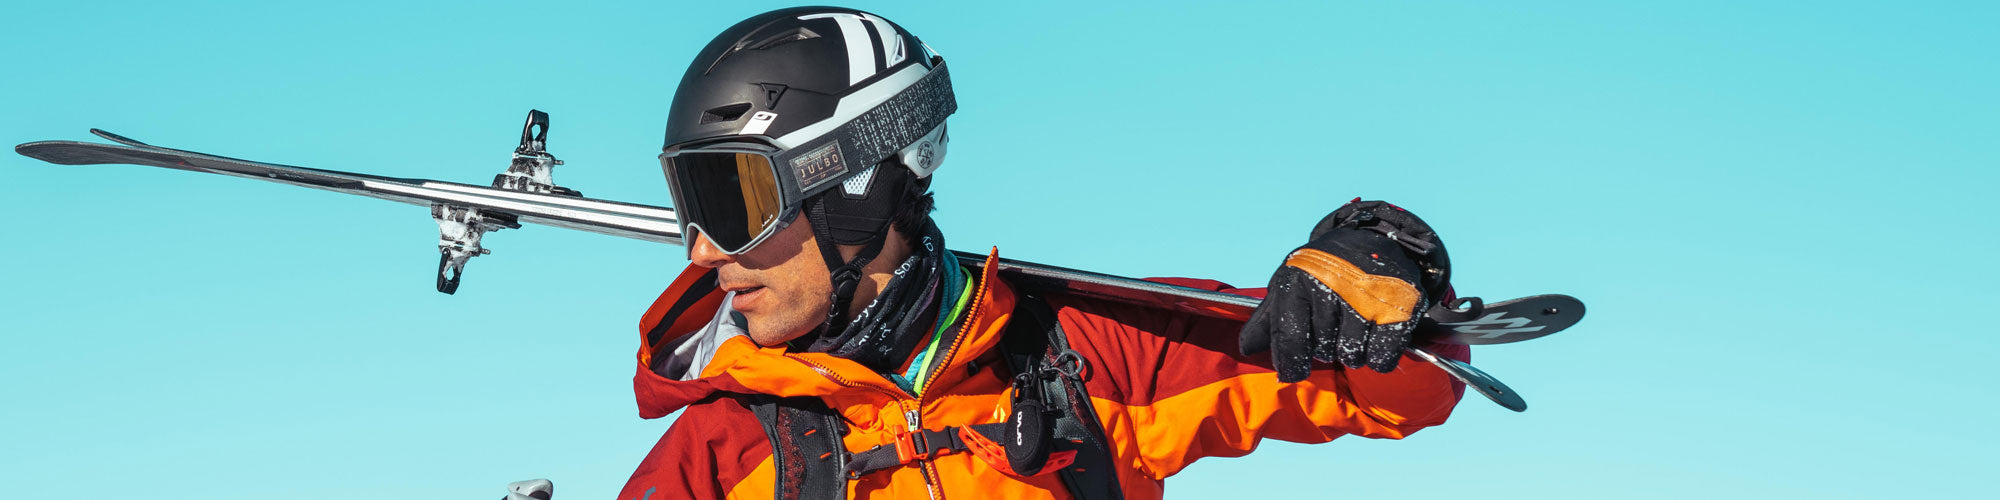 Backcountry Skier in Julbo Helmet and Goggles